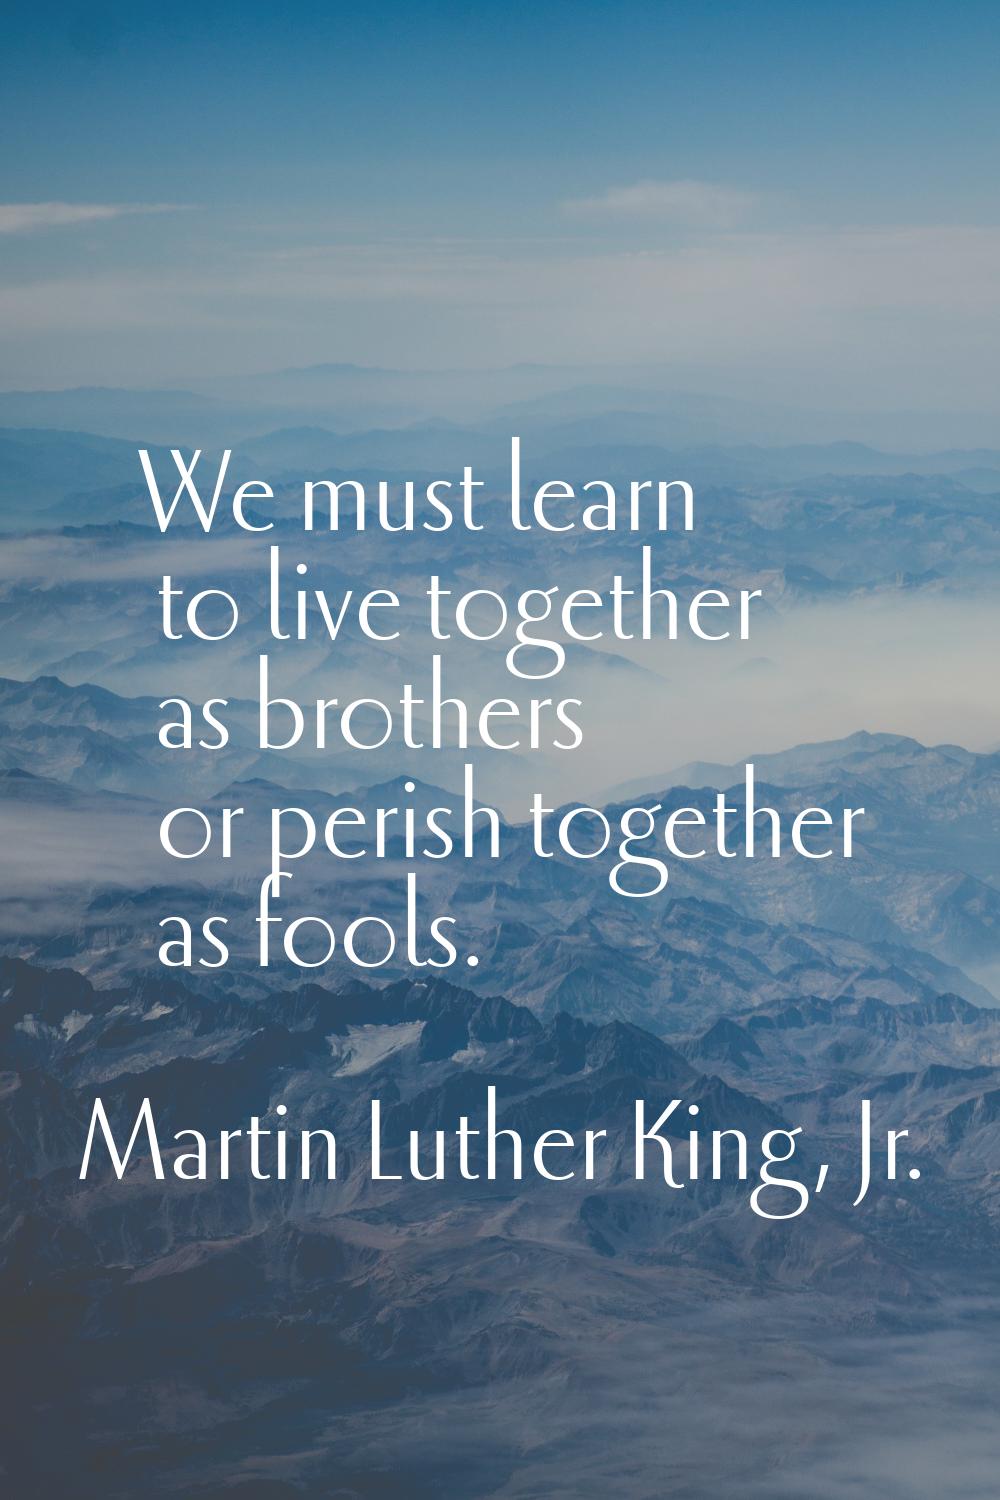 We must learn to live together as brothers or perish together as fools.